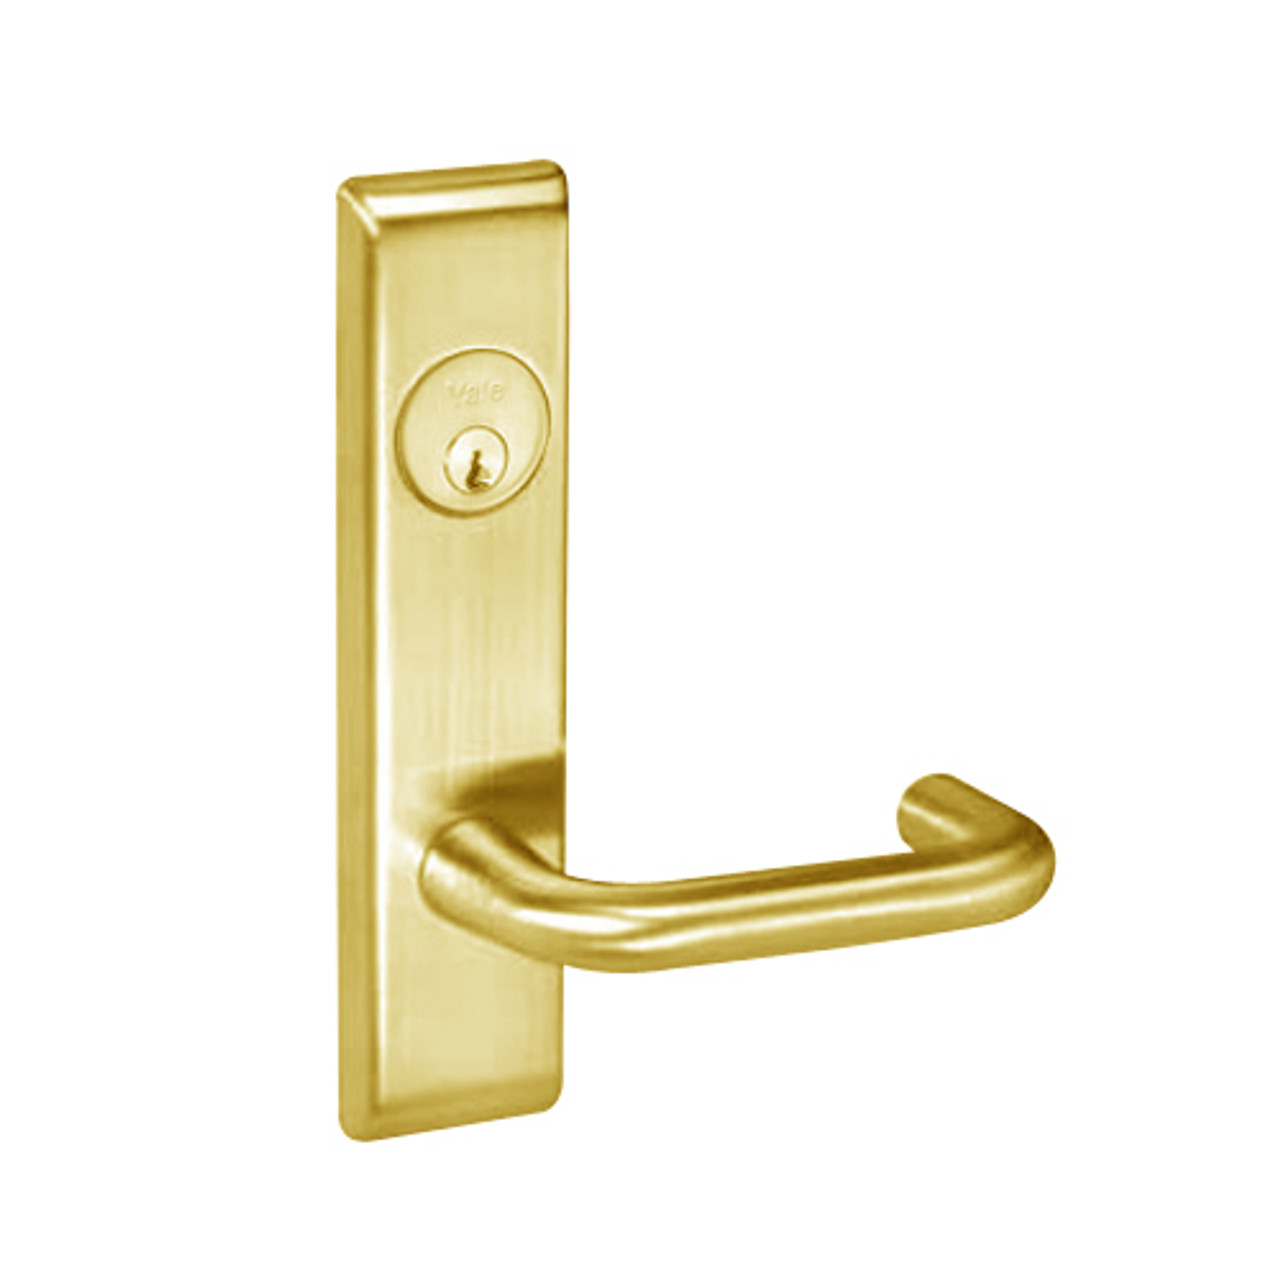 CRCN8833FL-605 Yale 8800FL Series Single Cylinder Mortise Exit Locks with Carmel Lever in Bright Brass